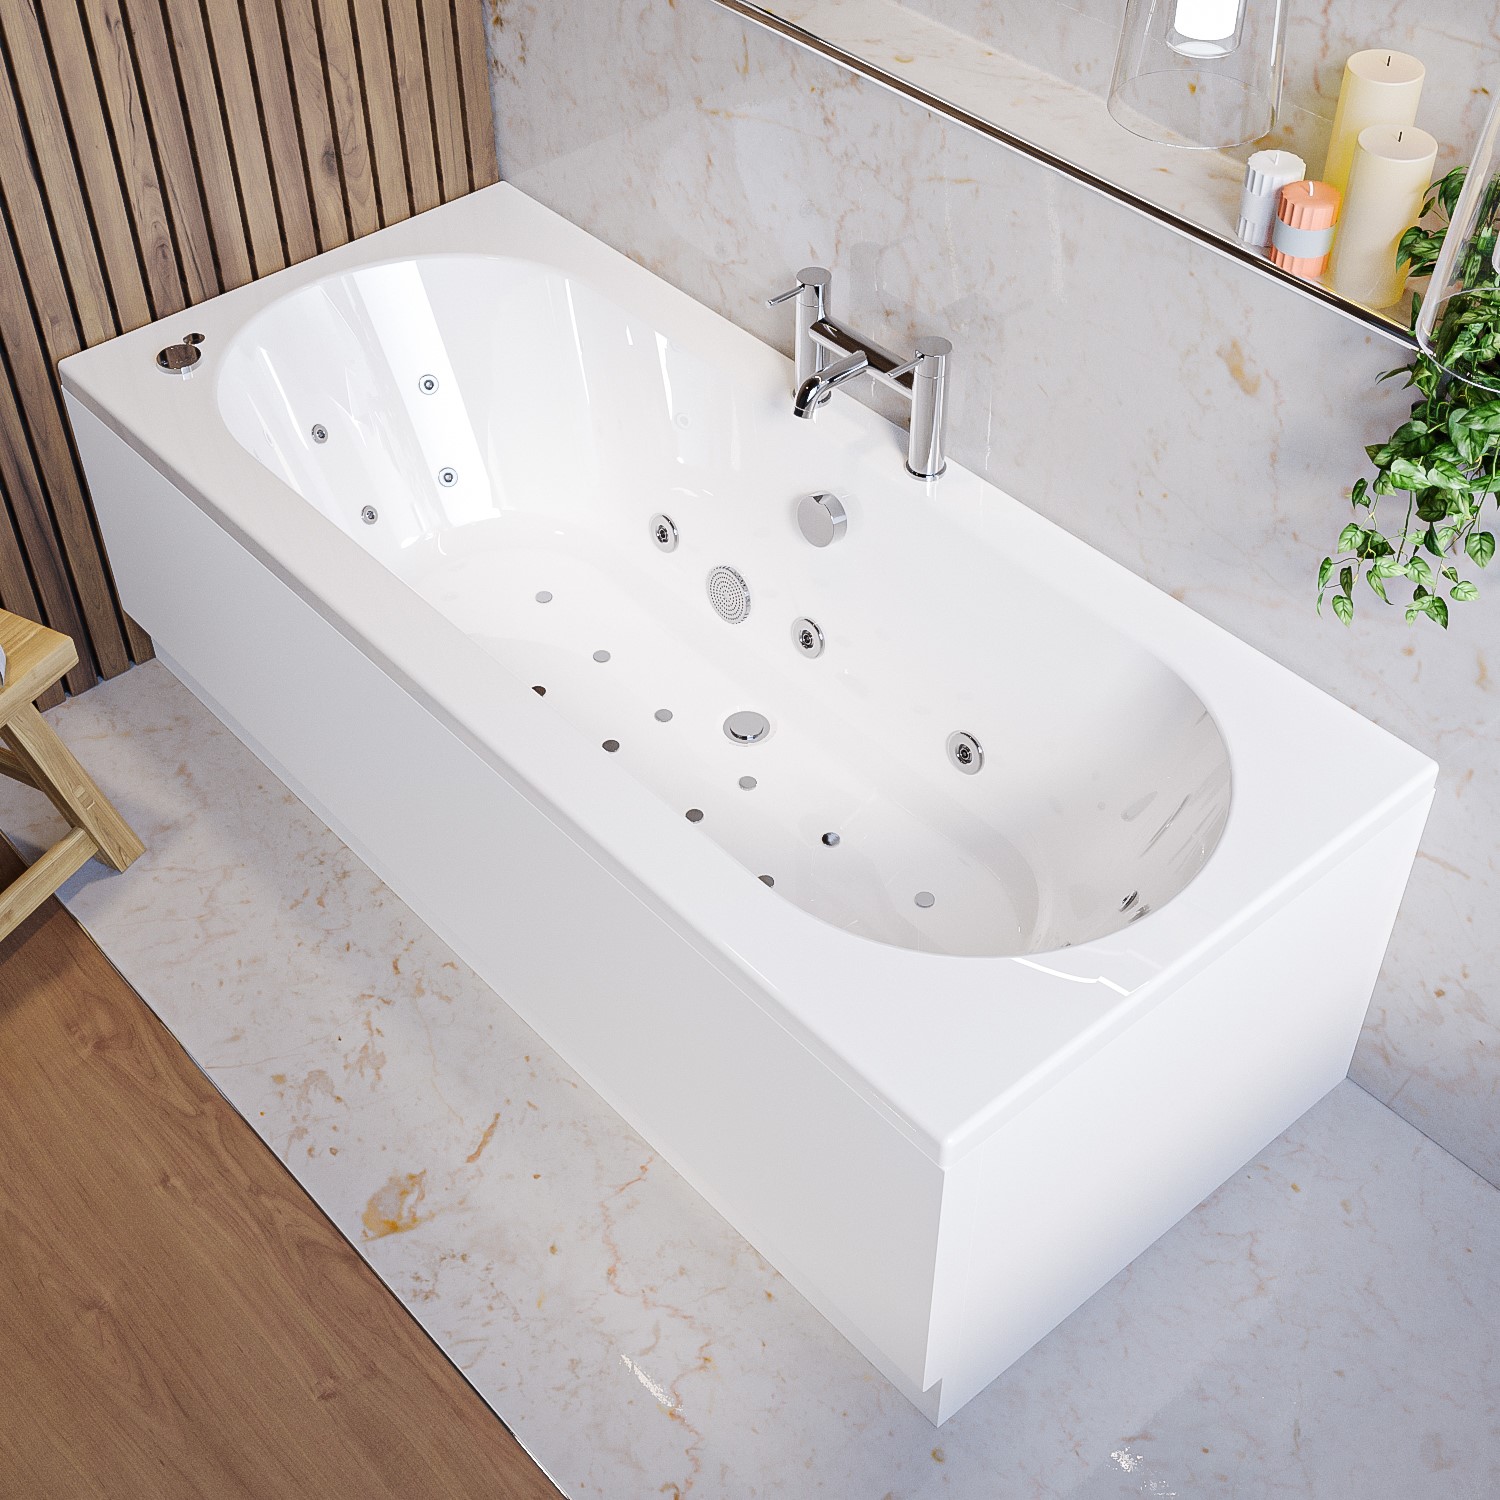 Burford Double Ended Bath with 14 Jet Whirlpool System and 12 Jet Airspa System - 1700 x 750mm